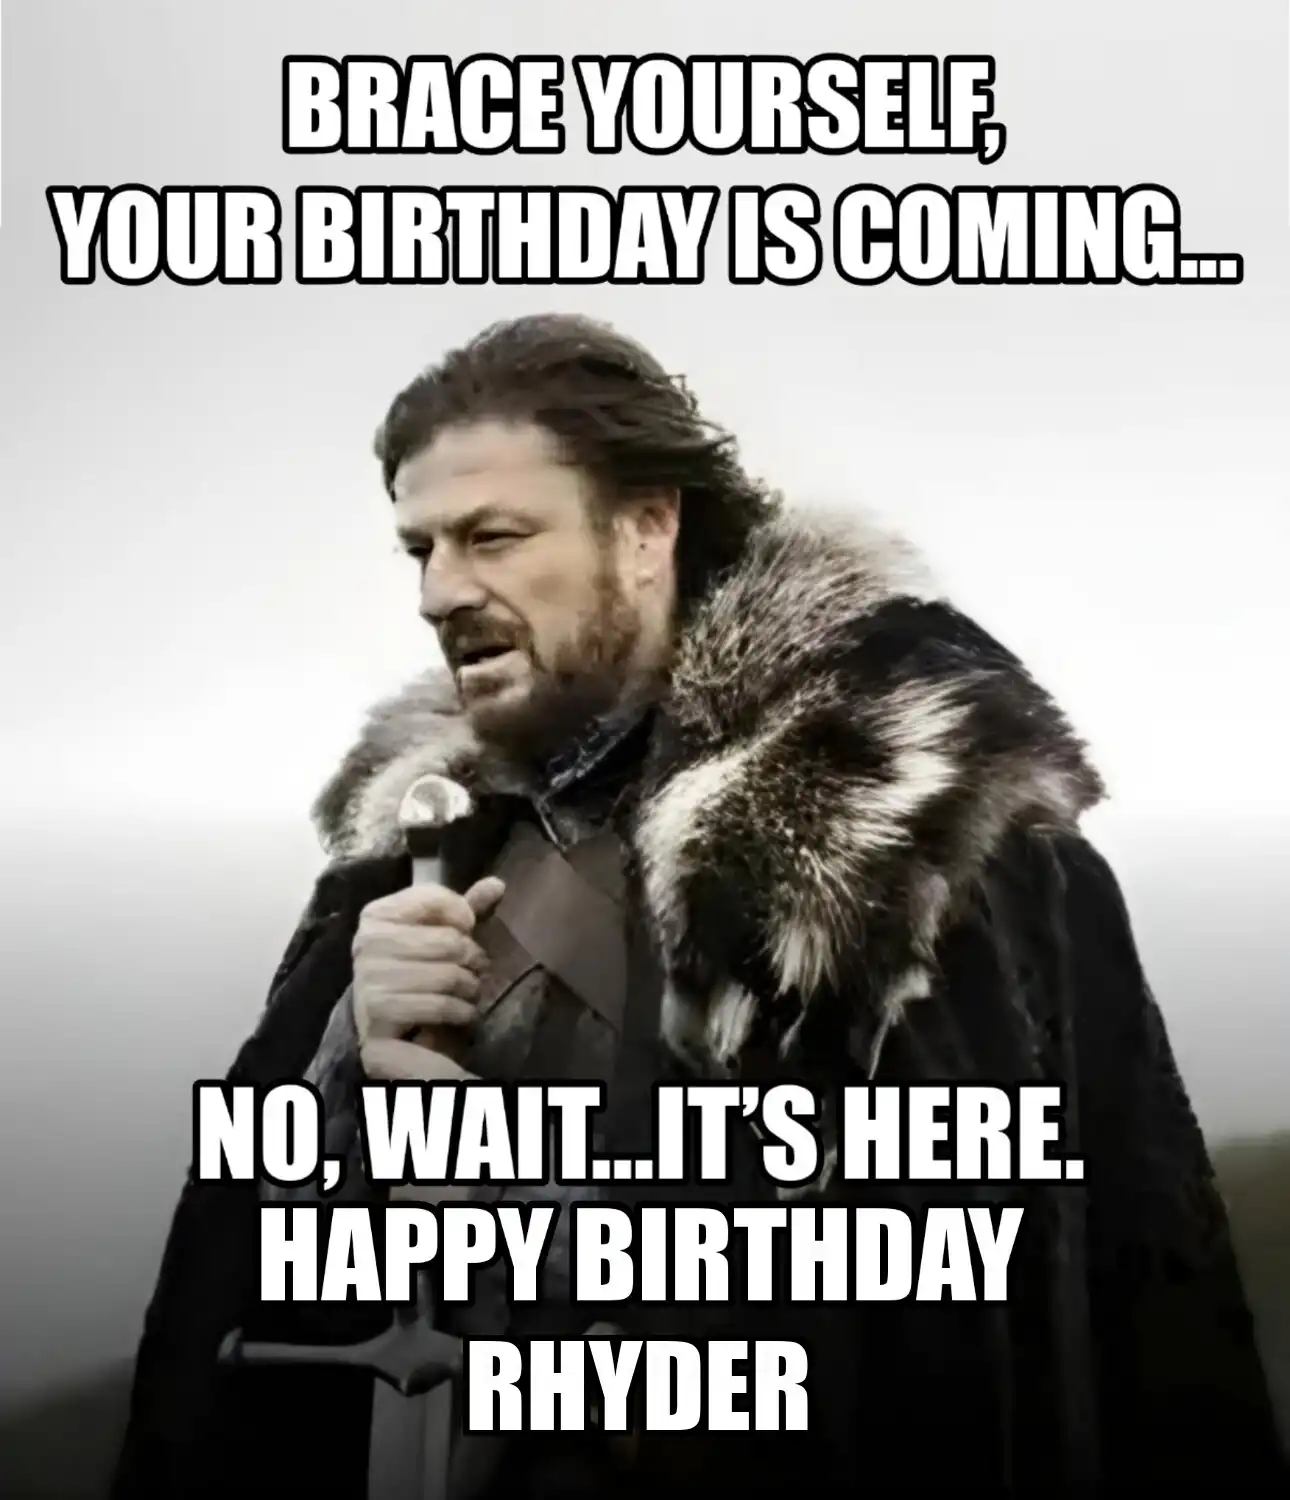 Happy Birthday Rhyder Brace Yourself Your Birthday Is Coming Meme